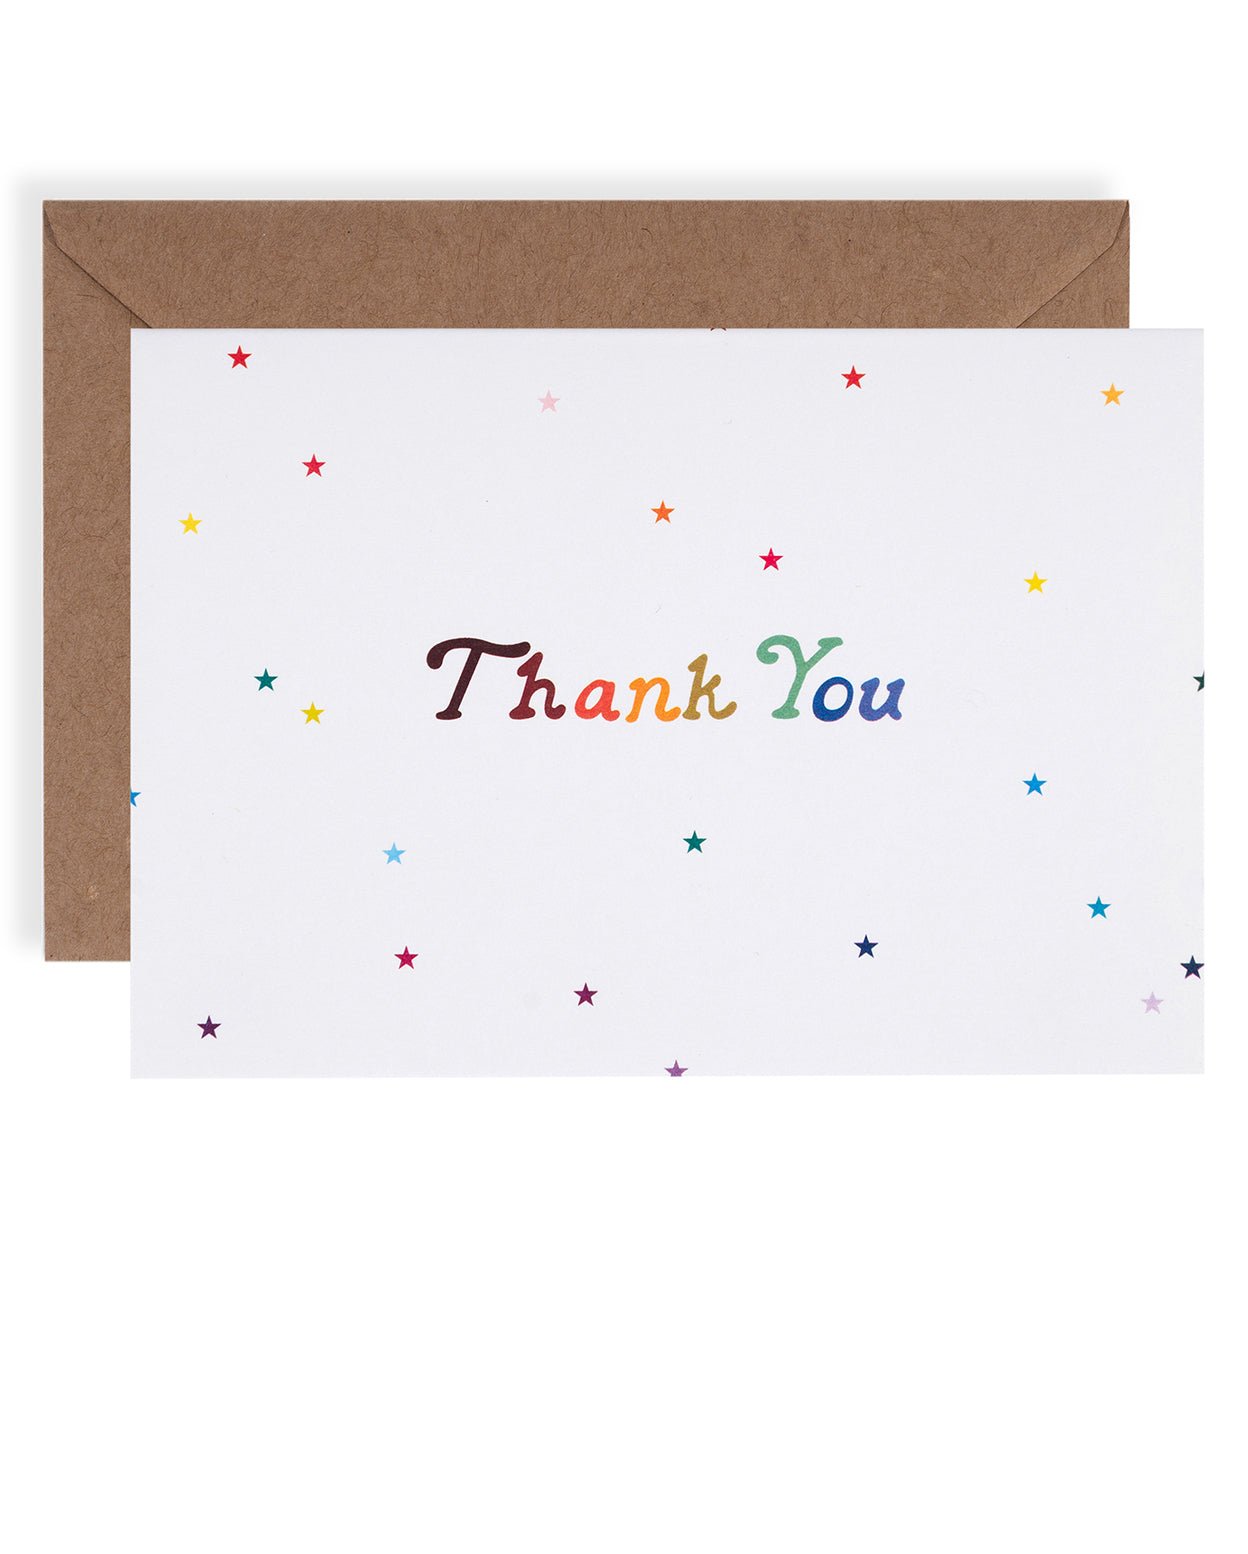 Rainbow stars thank you card. Rainbow colored letters printed on white cardstock with rainbow colored little stars spaced sparingly resting on a kraft envelope.